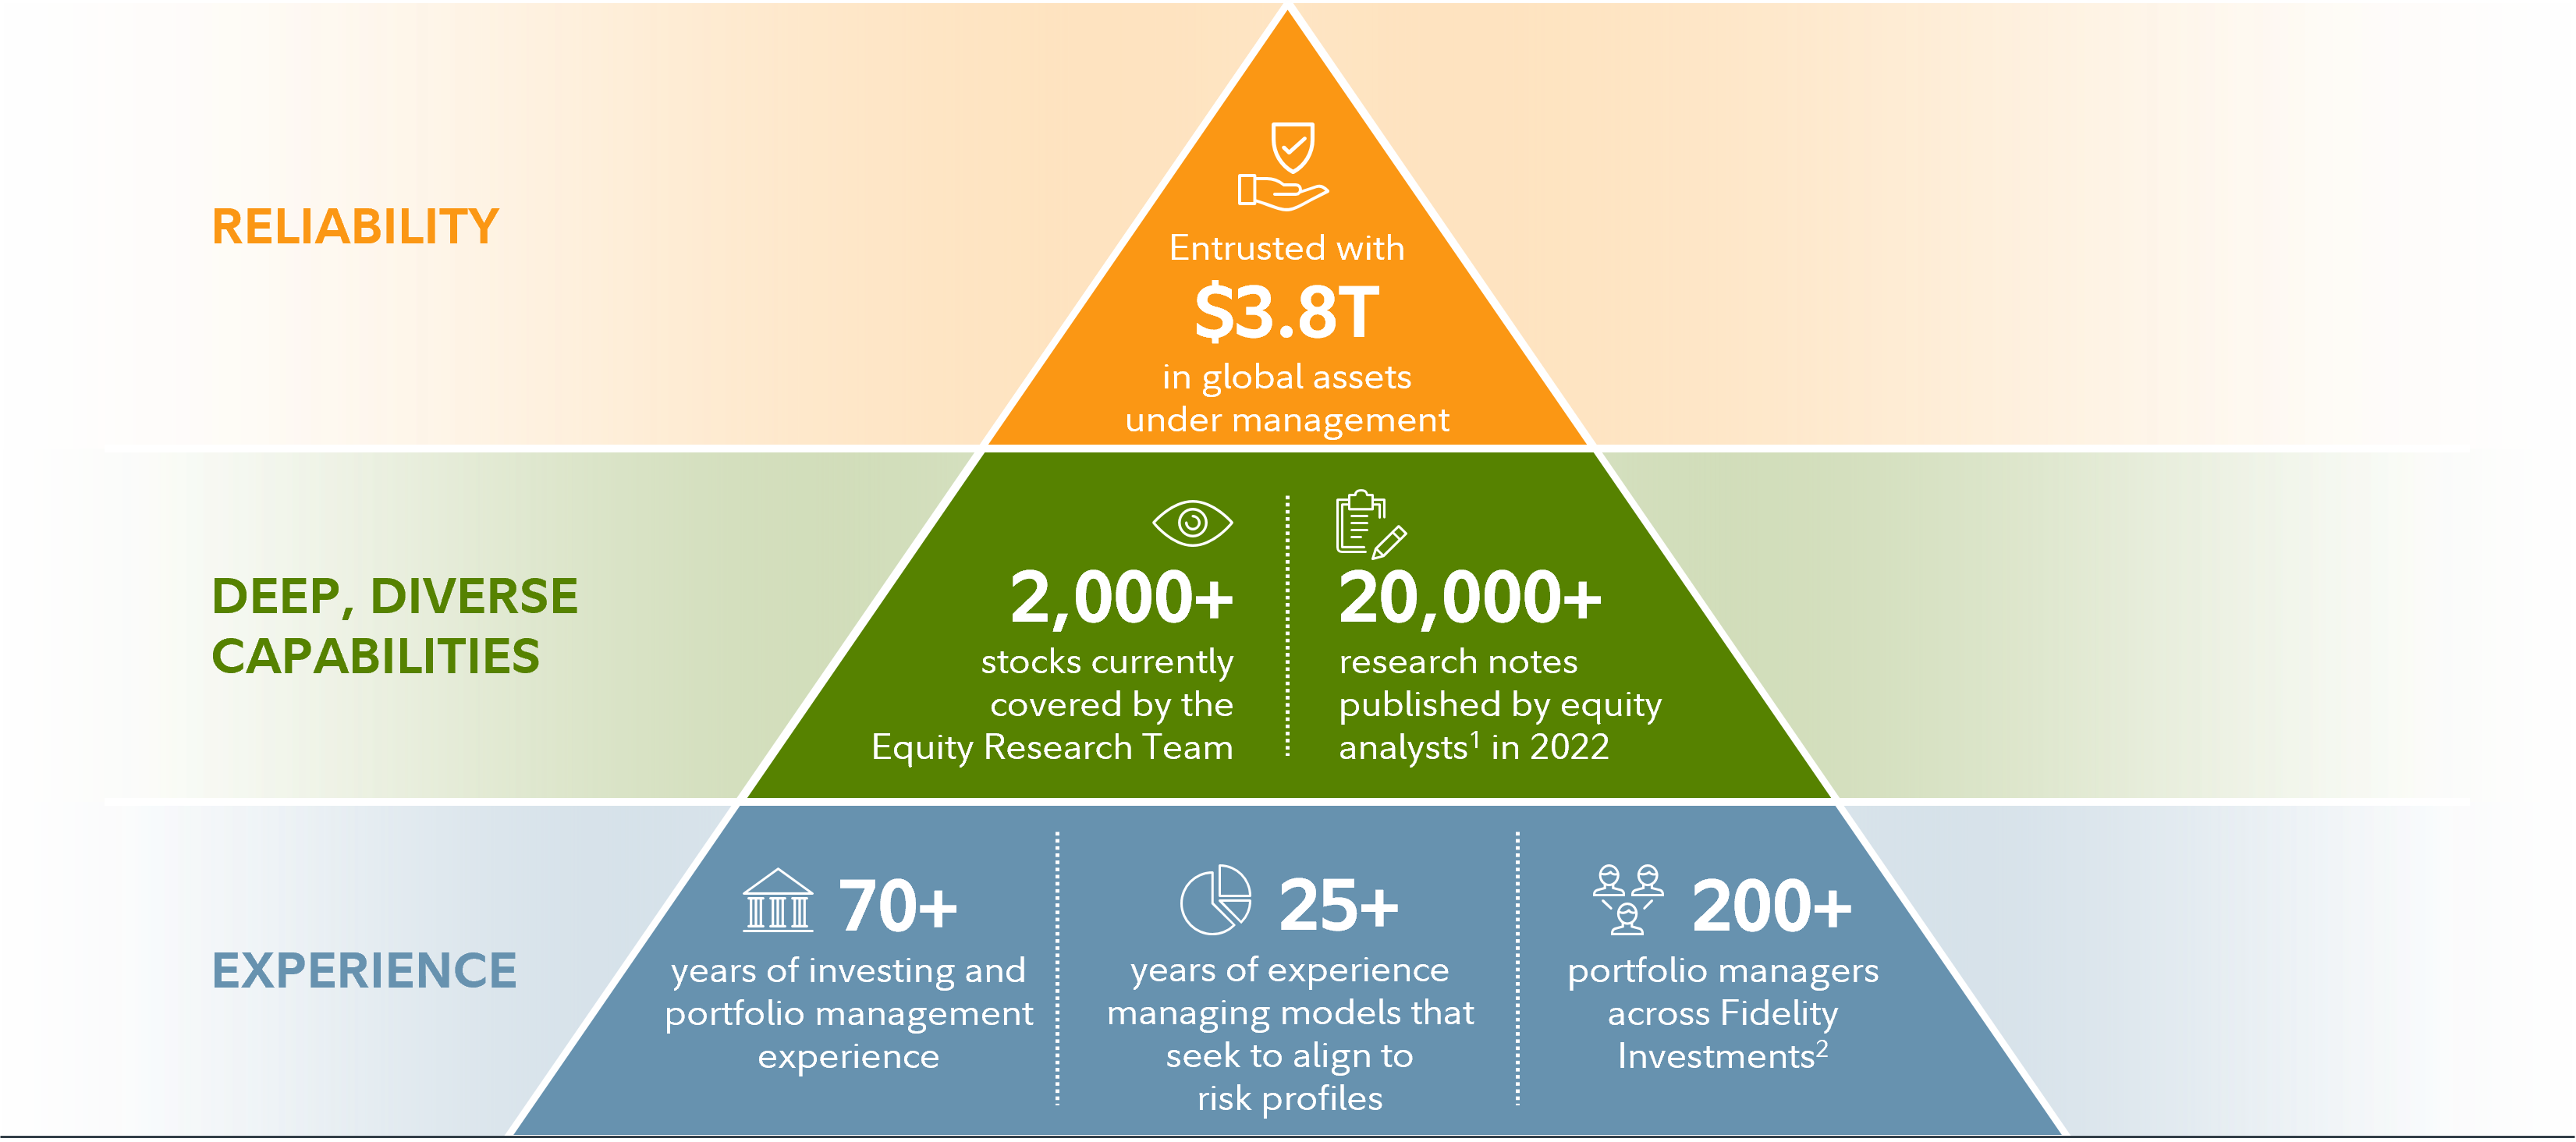 Pyramid depicts the elements of the power behind Fidelity's active management. At the top of the pyramid is reliability; the firm has $3.8 trillion in global assets under management. Next is Deep, Diverse Capabilities; there are currently 2,000+ stocks covered by the equity research team and 20,000 research notes published by equity analysts in 2022. Next level down is experience; Fidelity Management and Research Company has a 70+ year of investing and portfolio management experience, 25+ years of managing models that seek to align to risk profiles, and 200+ portfolio managers across Fidelity Asset Management.